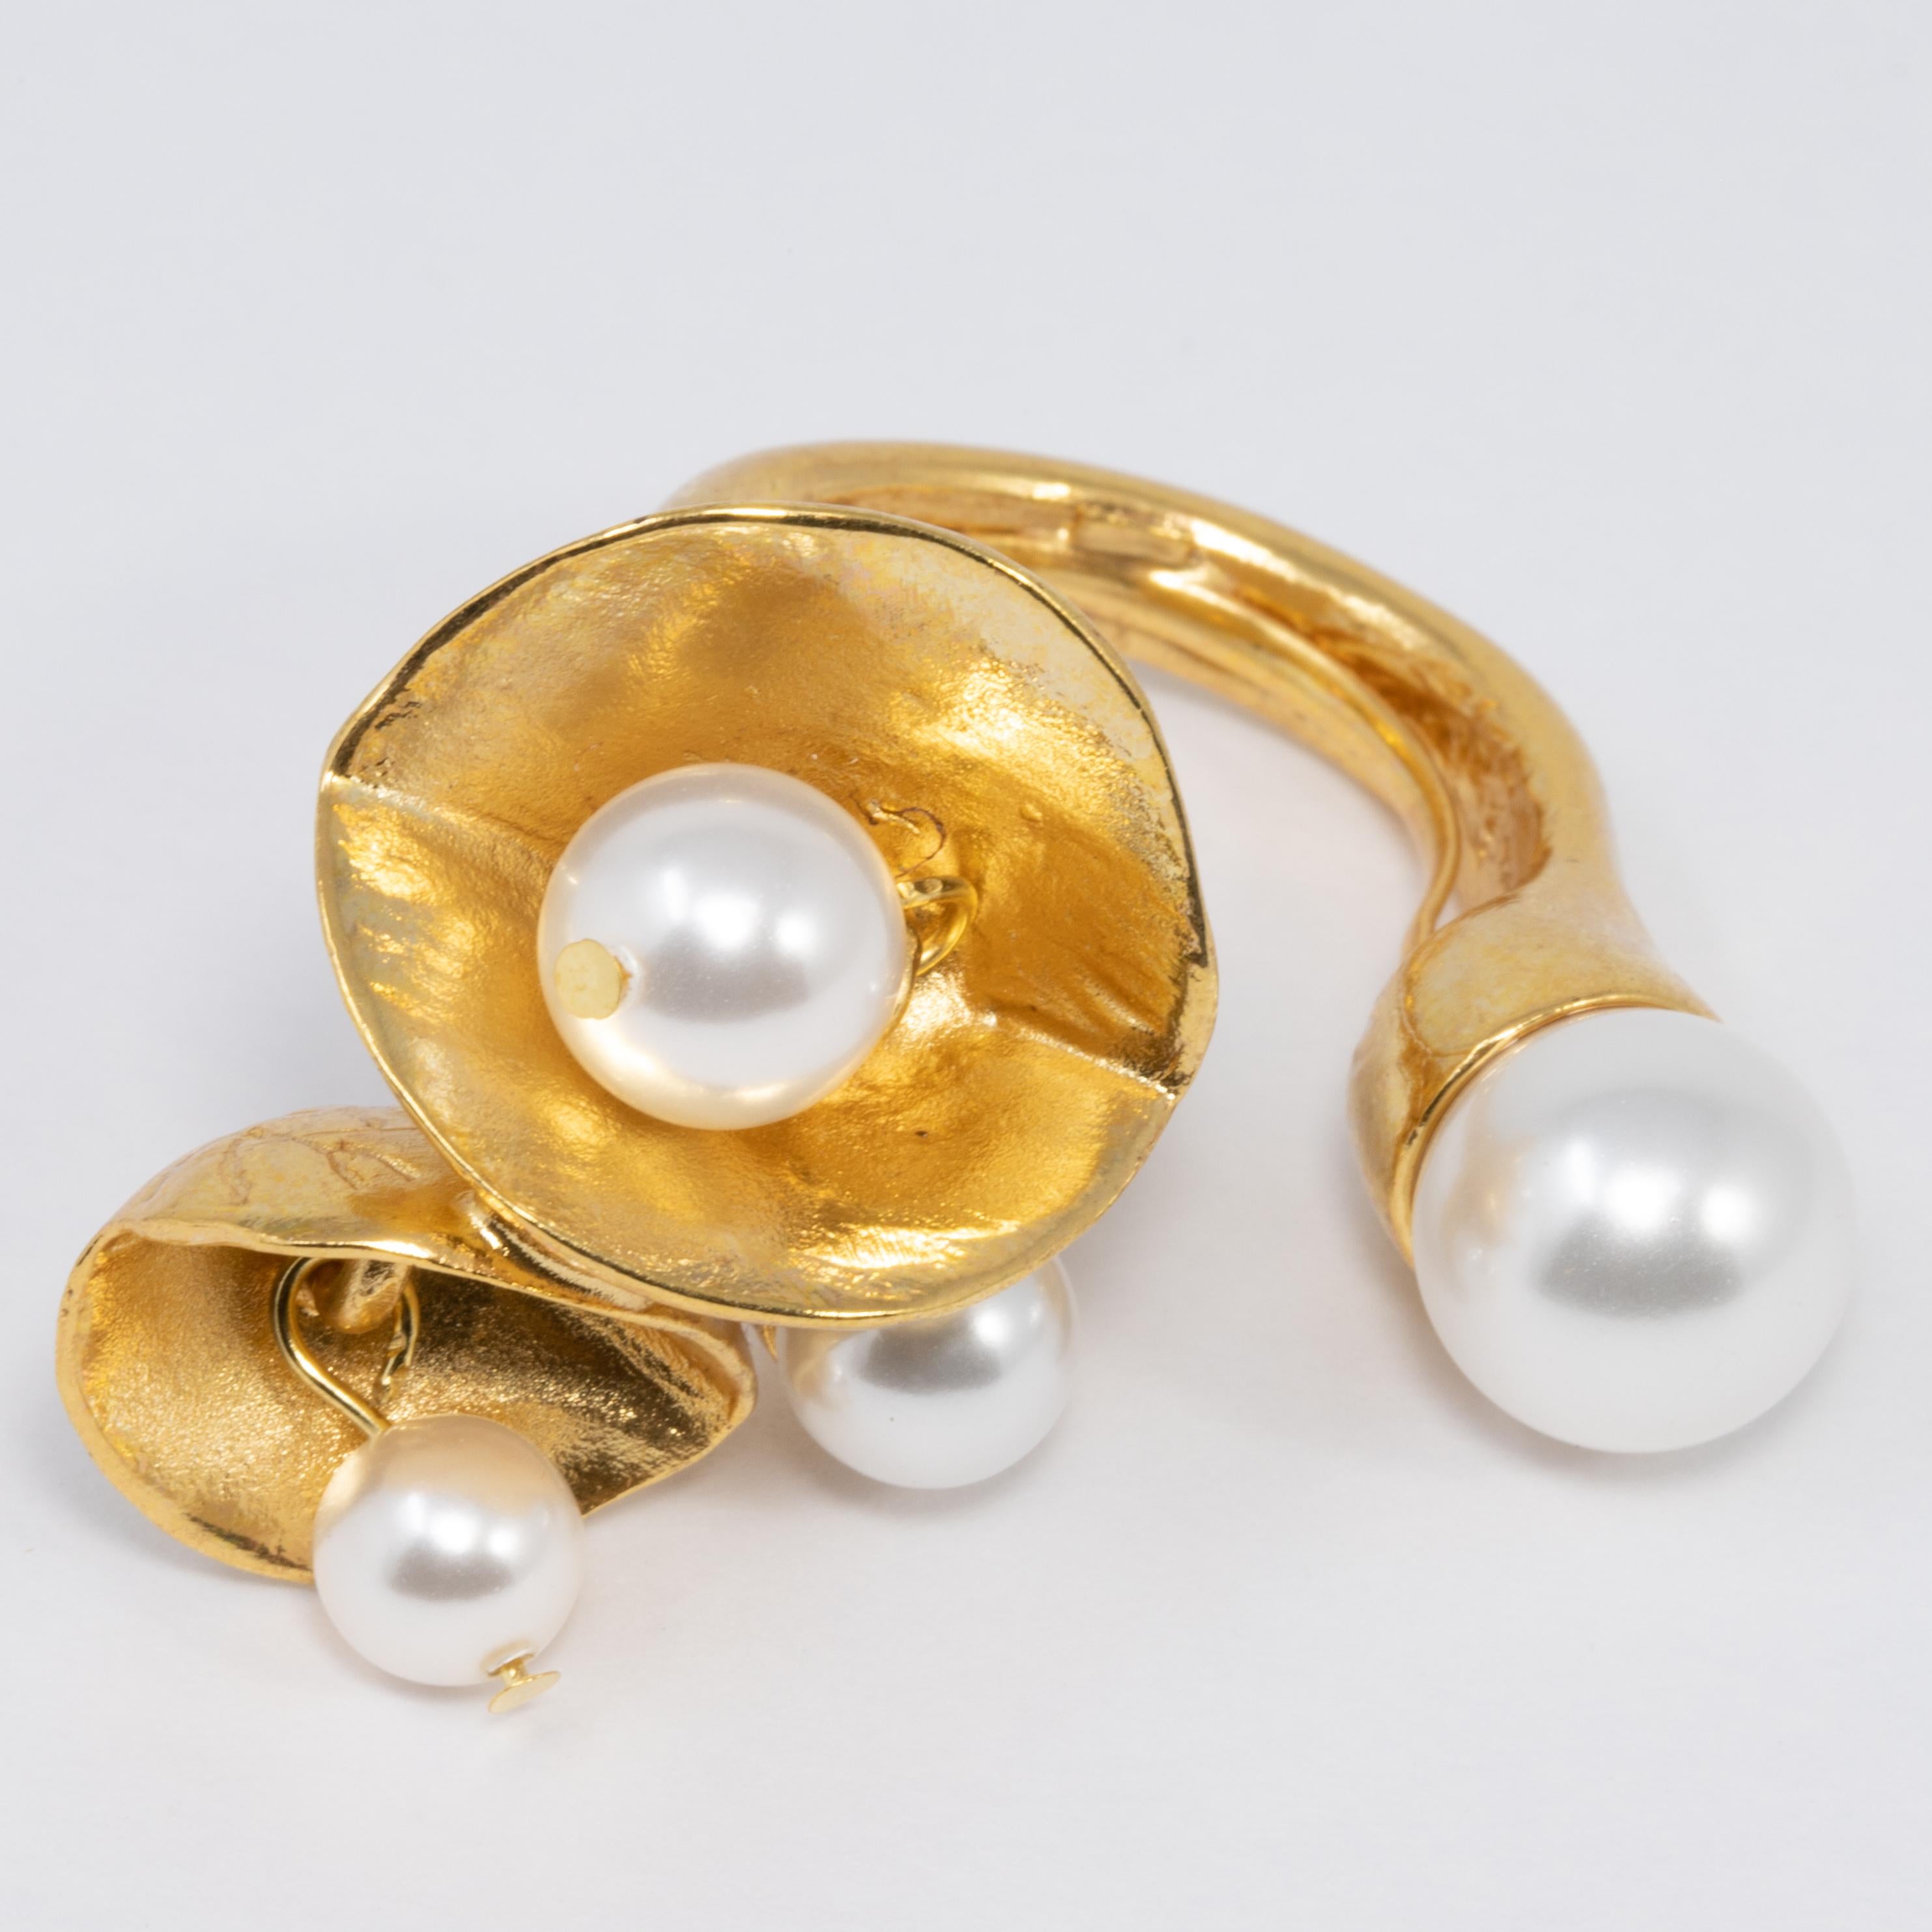 Oscar de la Renta golden, open-style cocktail ring with dangling faux pearls set in flowers.

Adjustable sizes 5 to 8.5

Tags, Marks, Hallmarks: Oscar de la Renta, Made in USA
